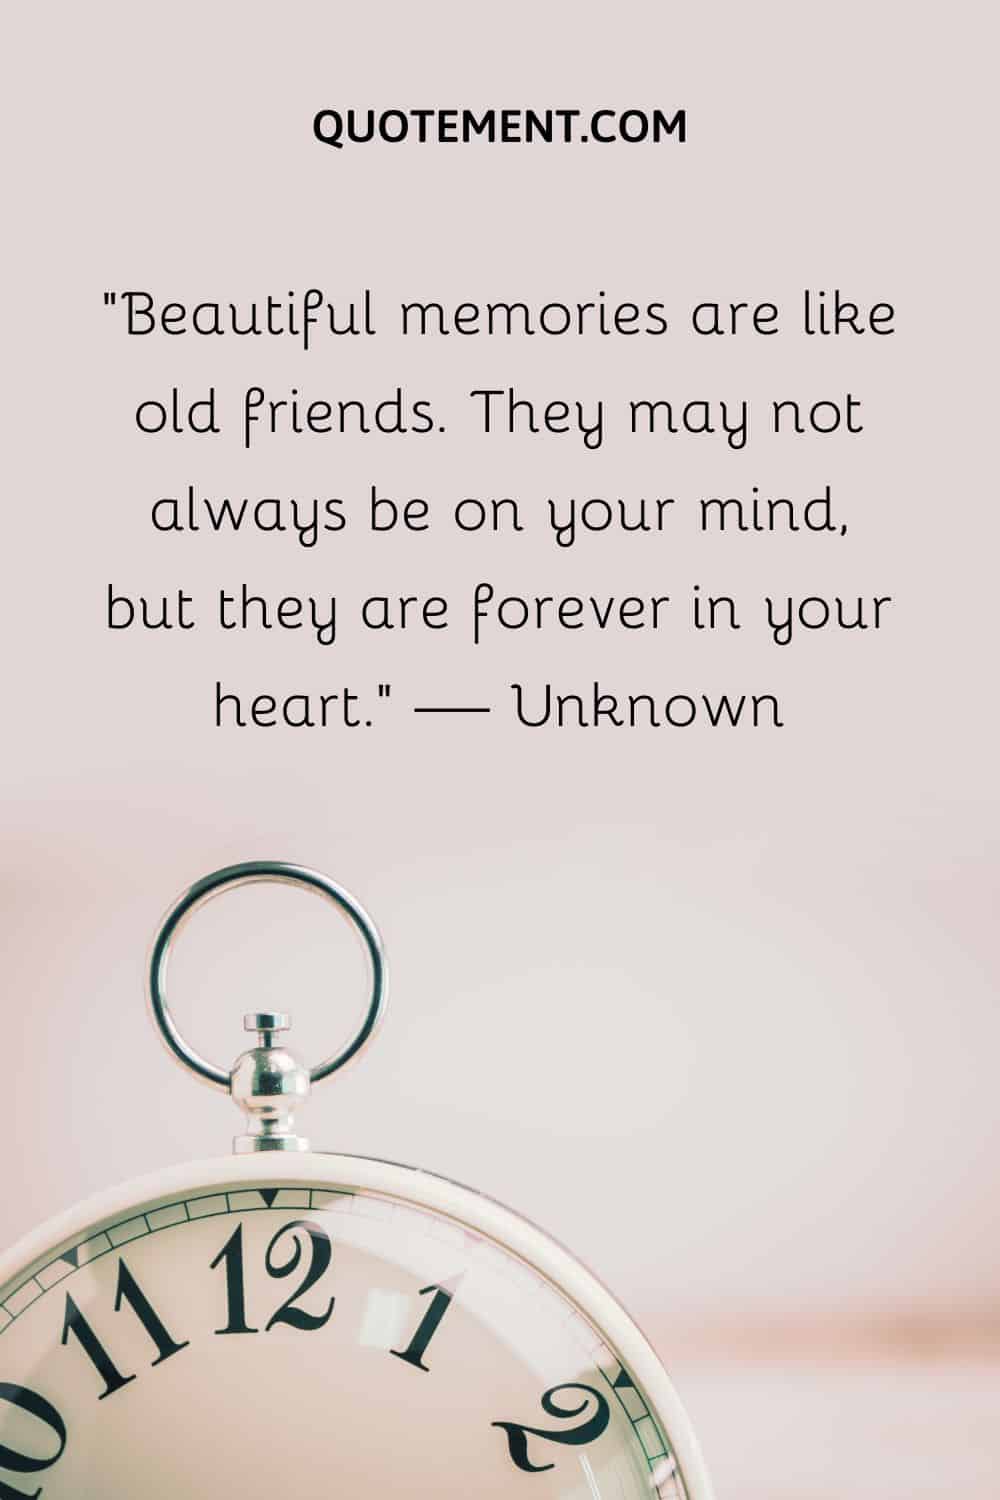 Beautiful memories are like old friends